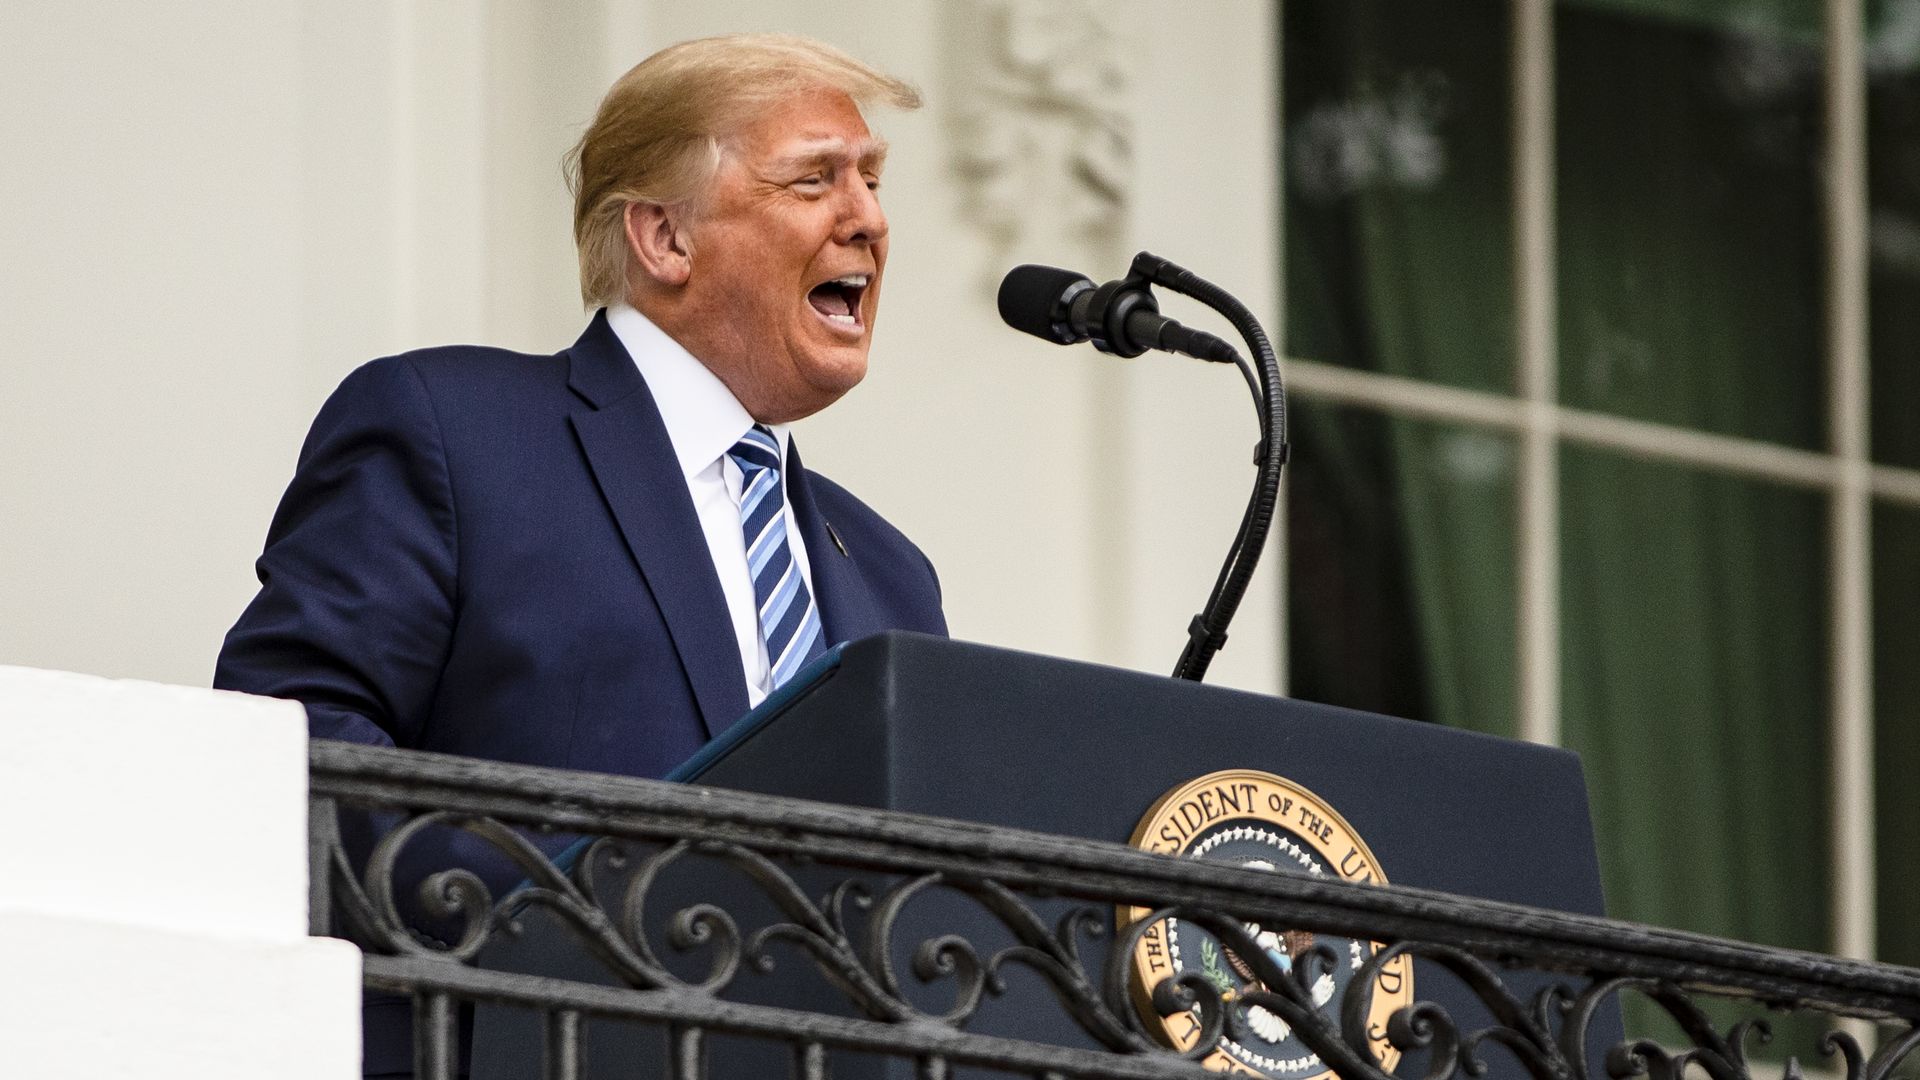 President Donald Trump addresses a rally in support of law and order on the South Lawn of the White House on October 10, 2020 in Washington, DC. 